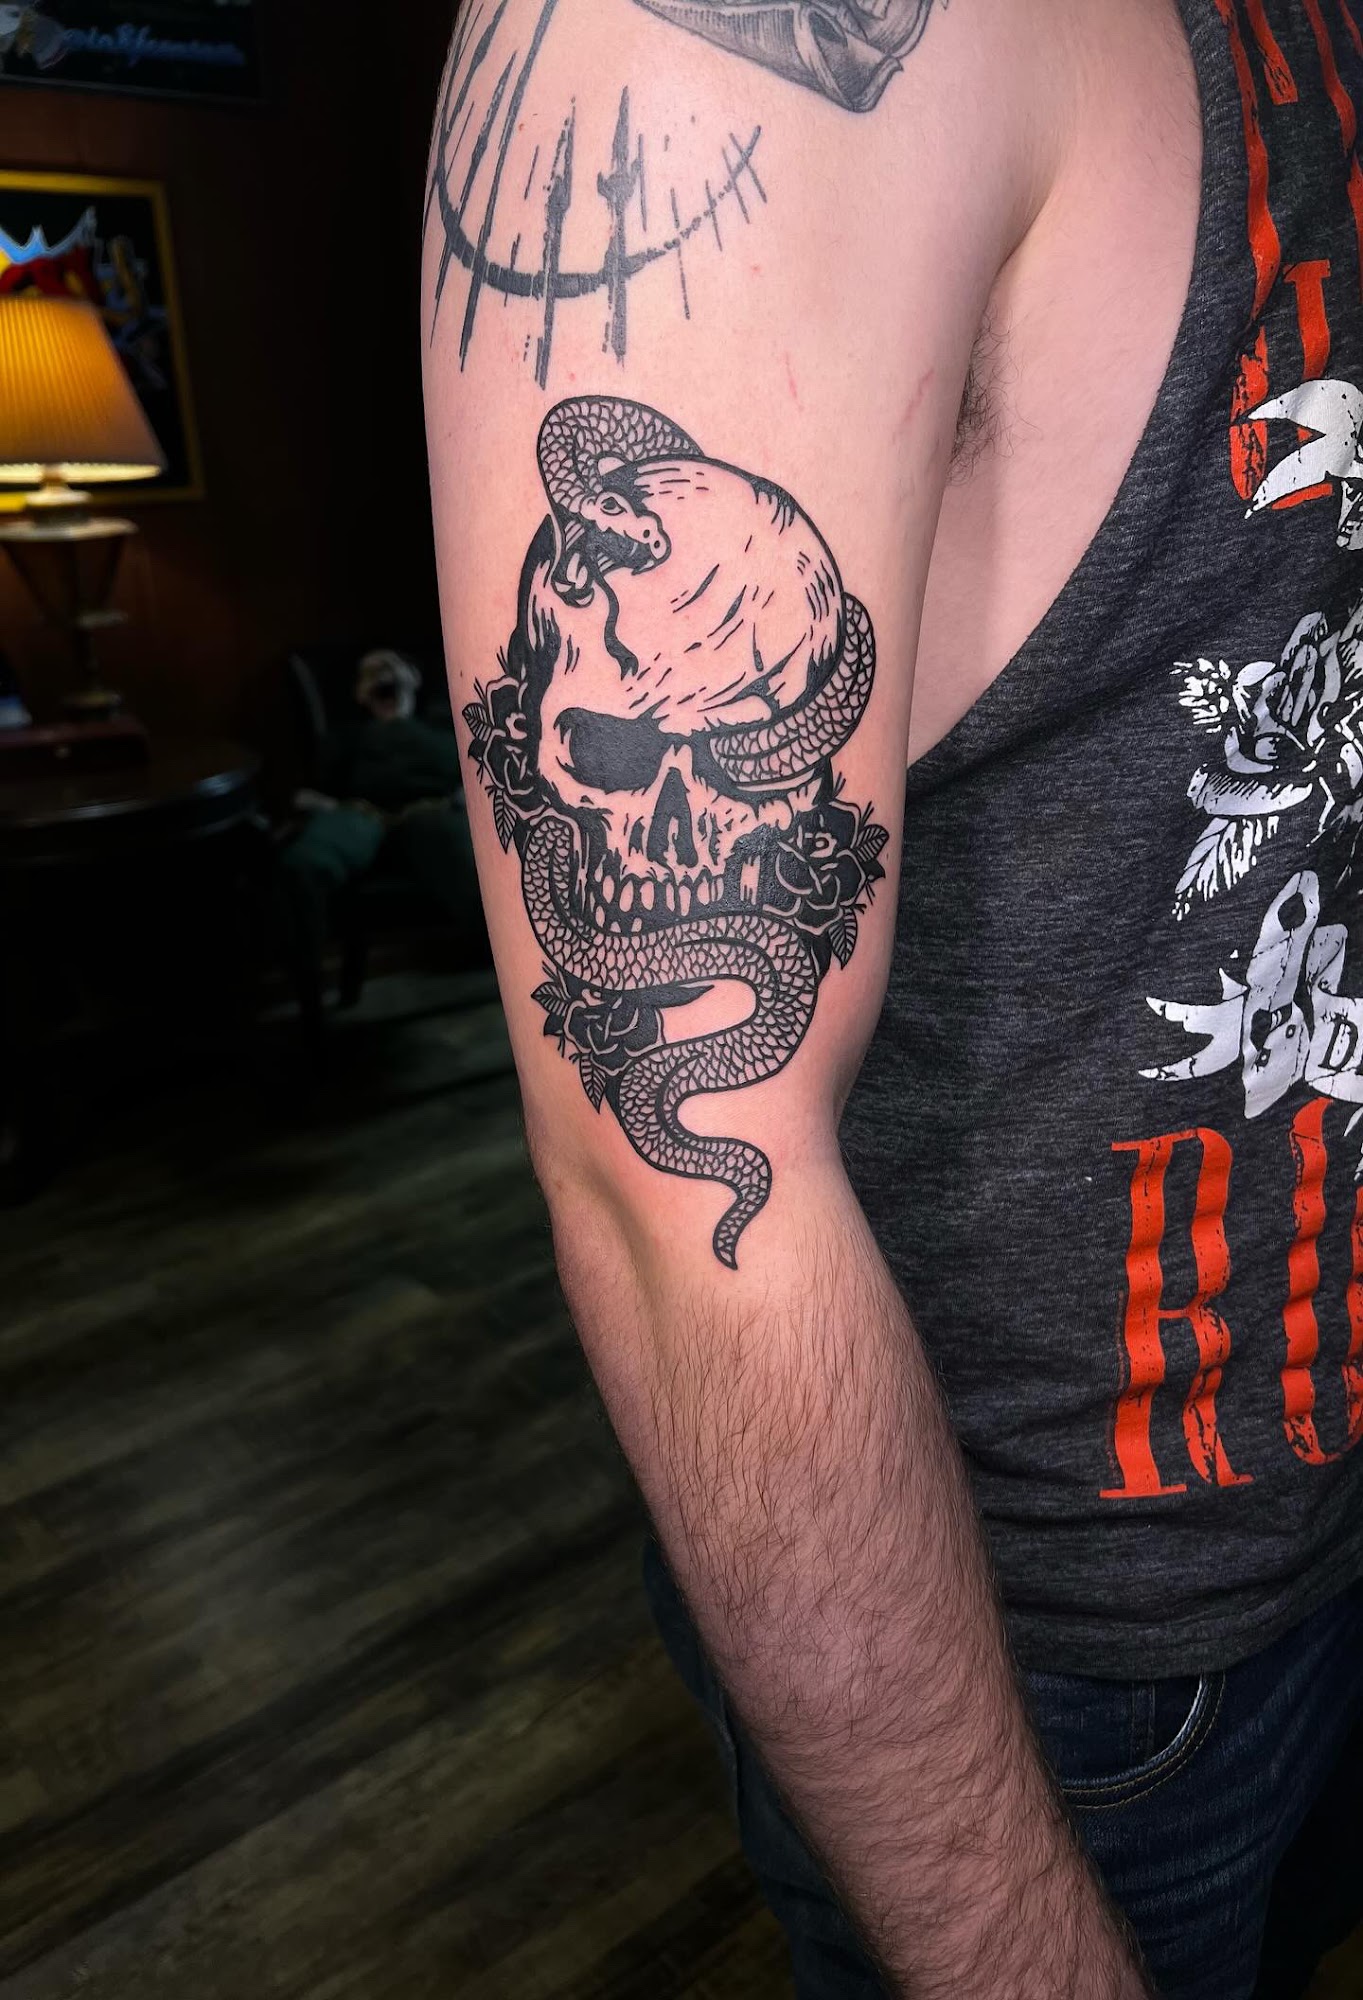 The Crimson Candle Tattoo and Art Collected